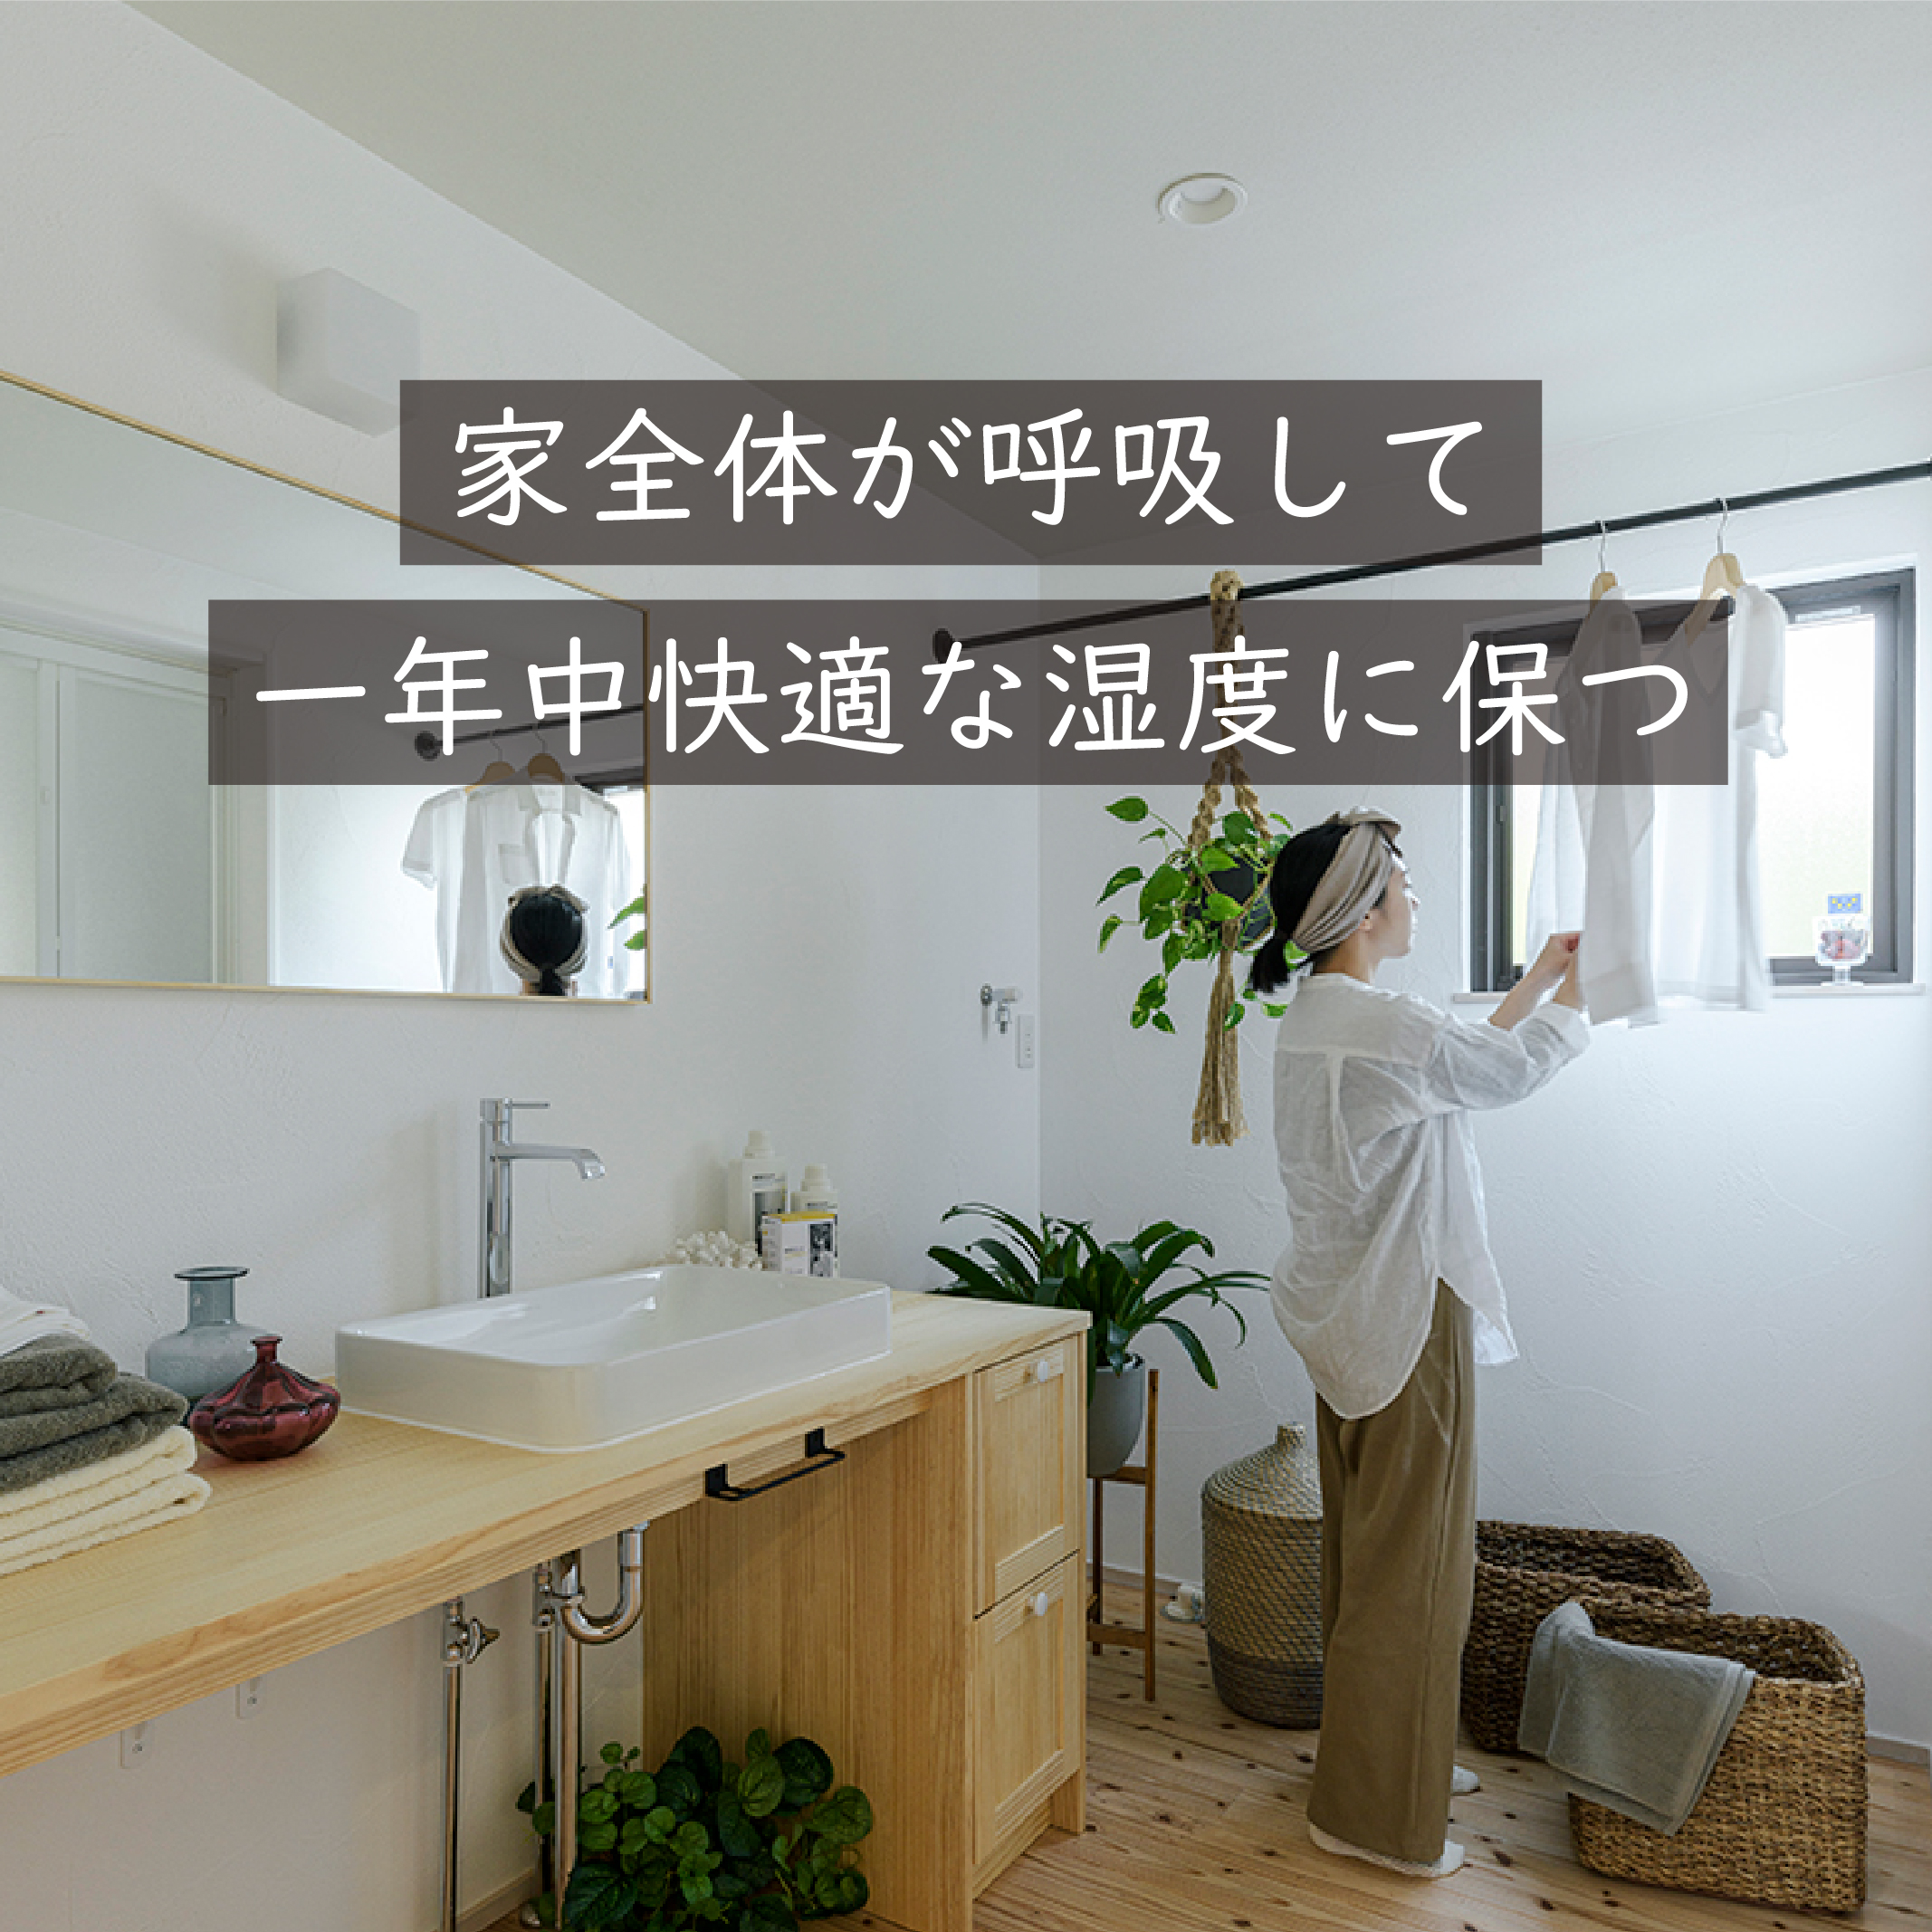 NatulifeHomes｜コンセプト